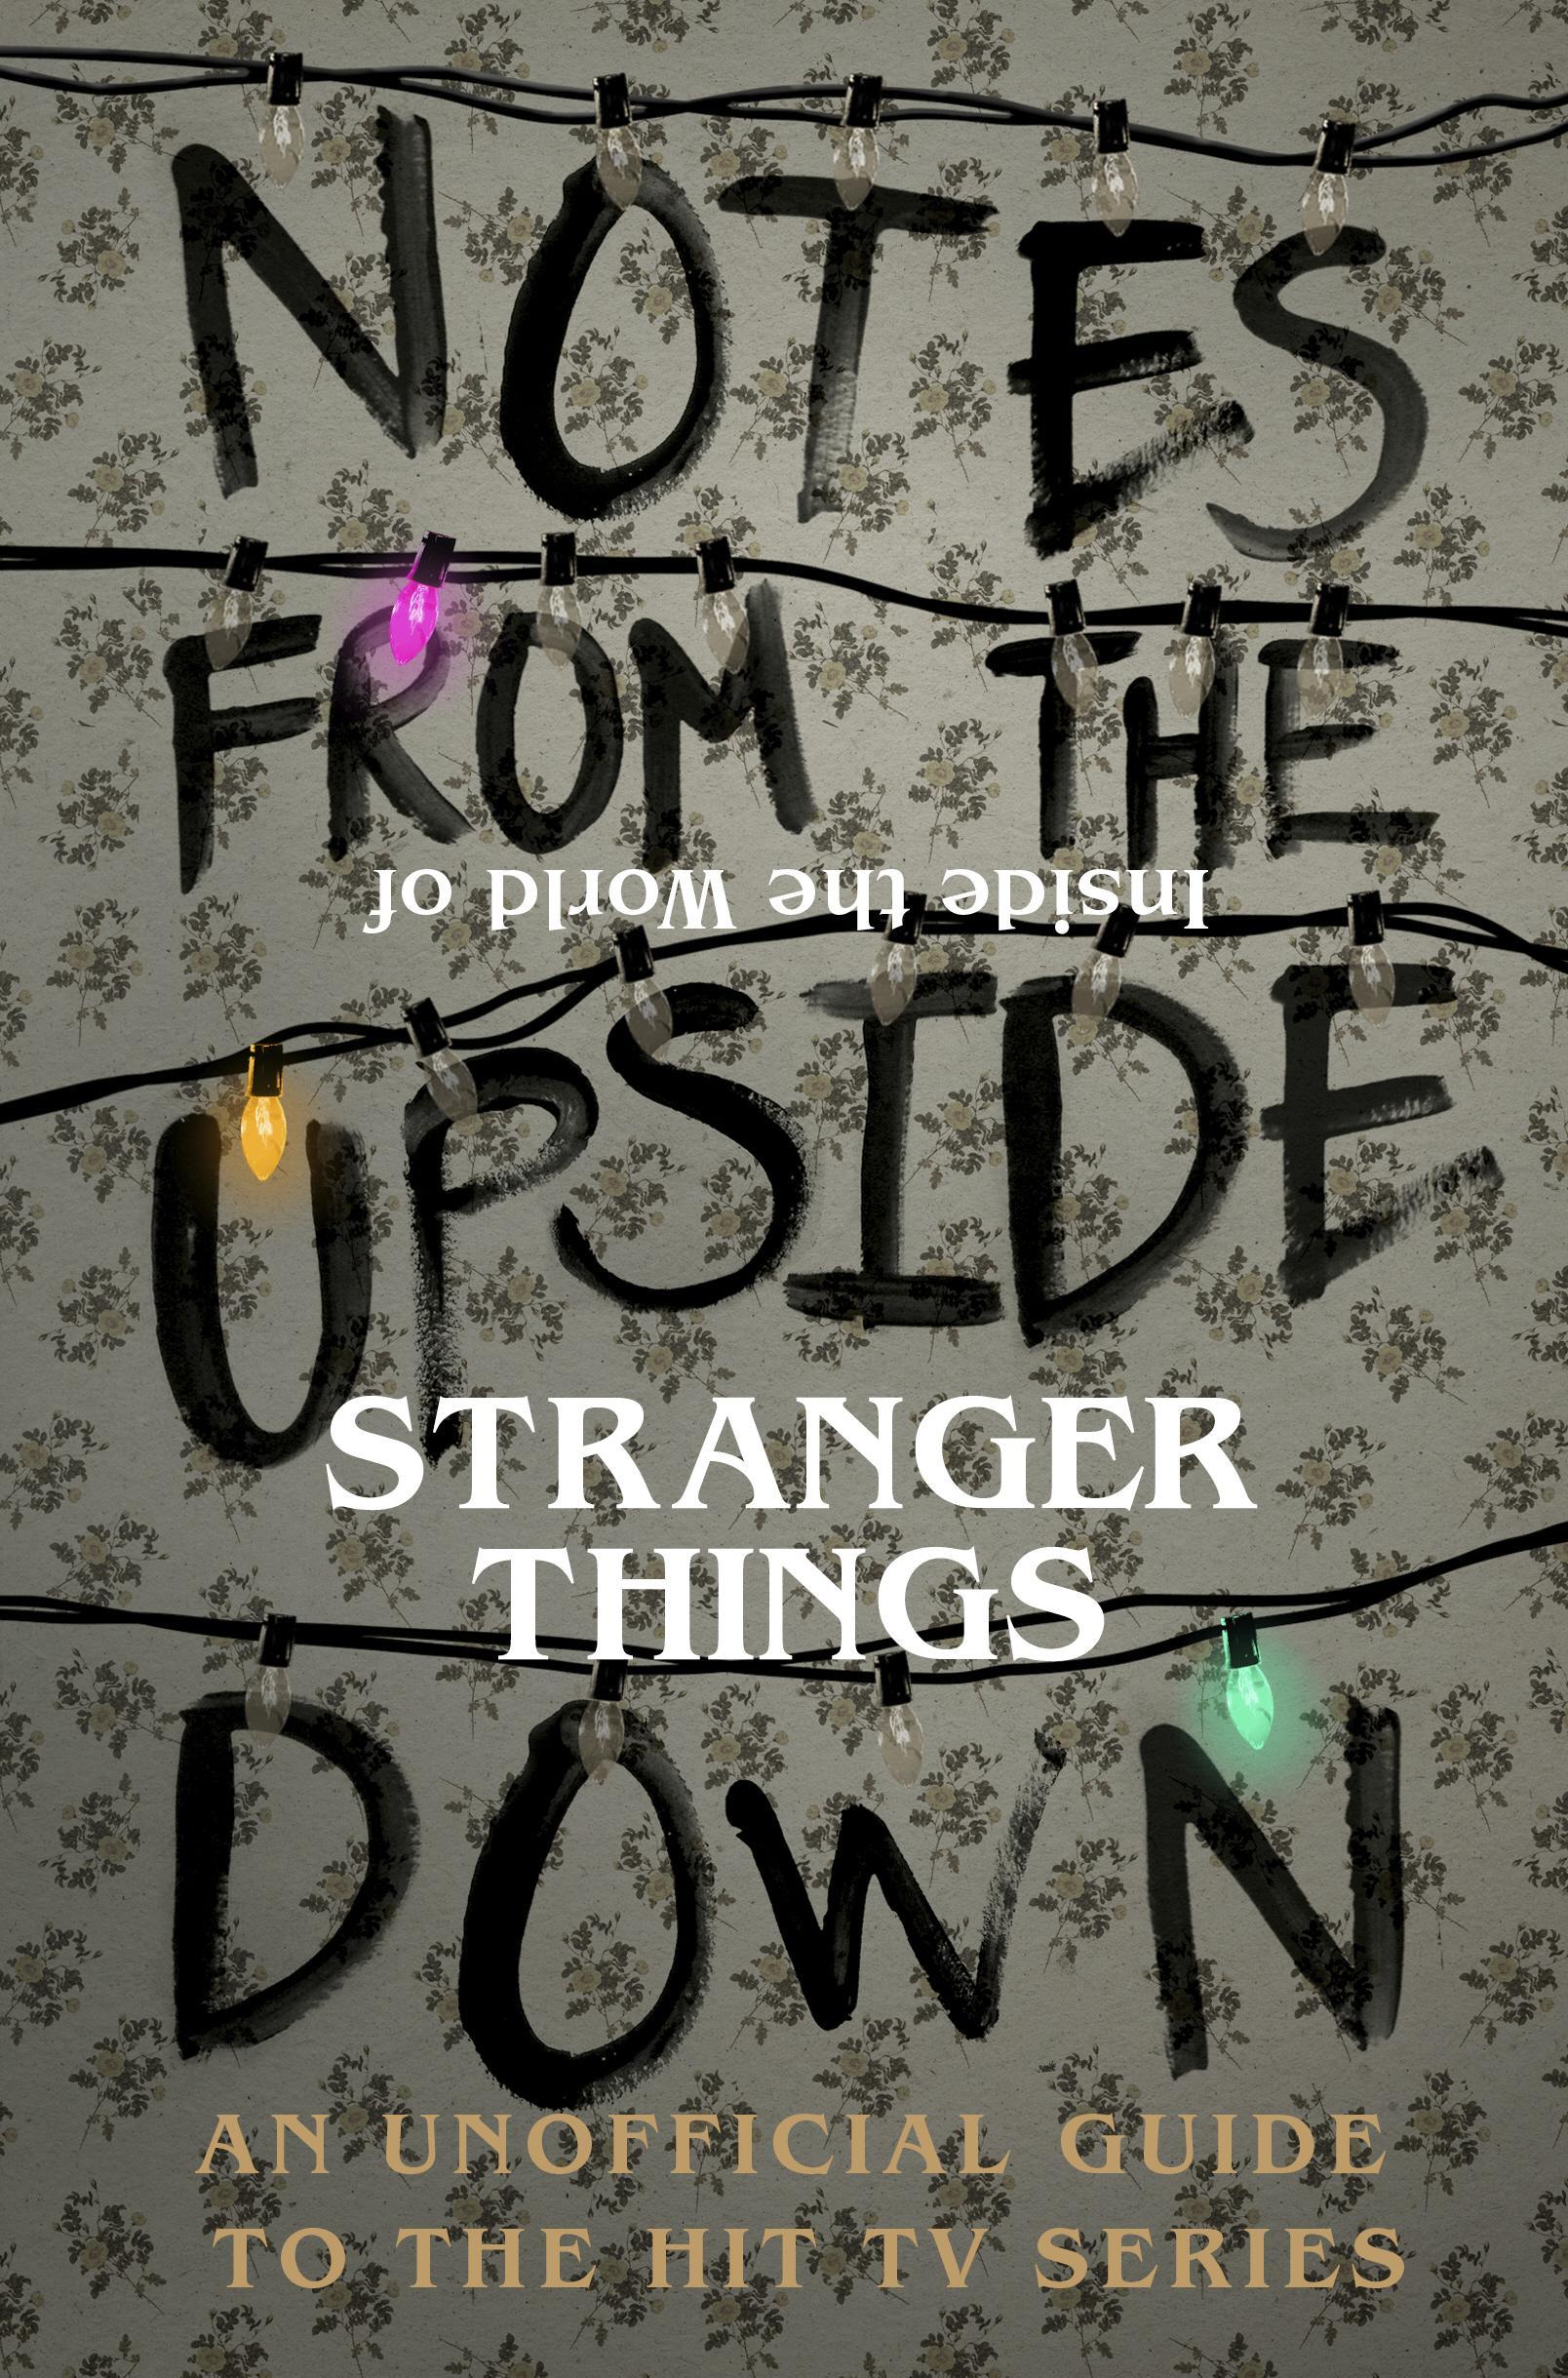 Notes From the Upside Down - Inside the World of Stranger Th